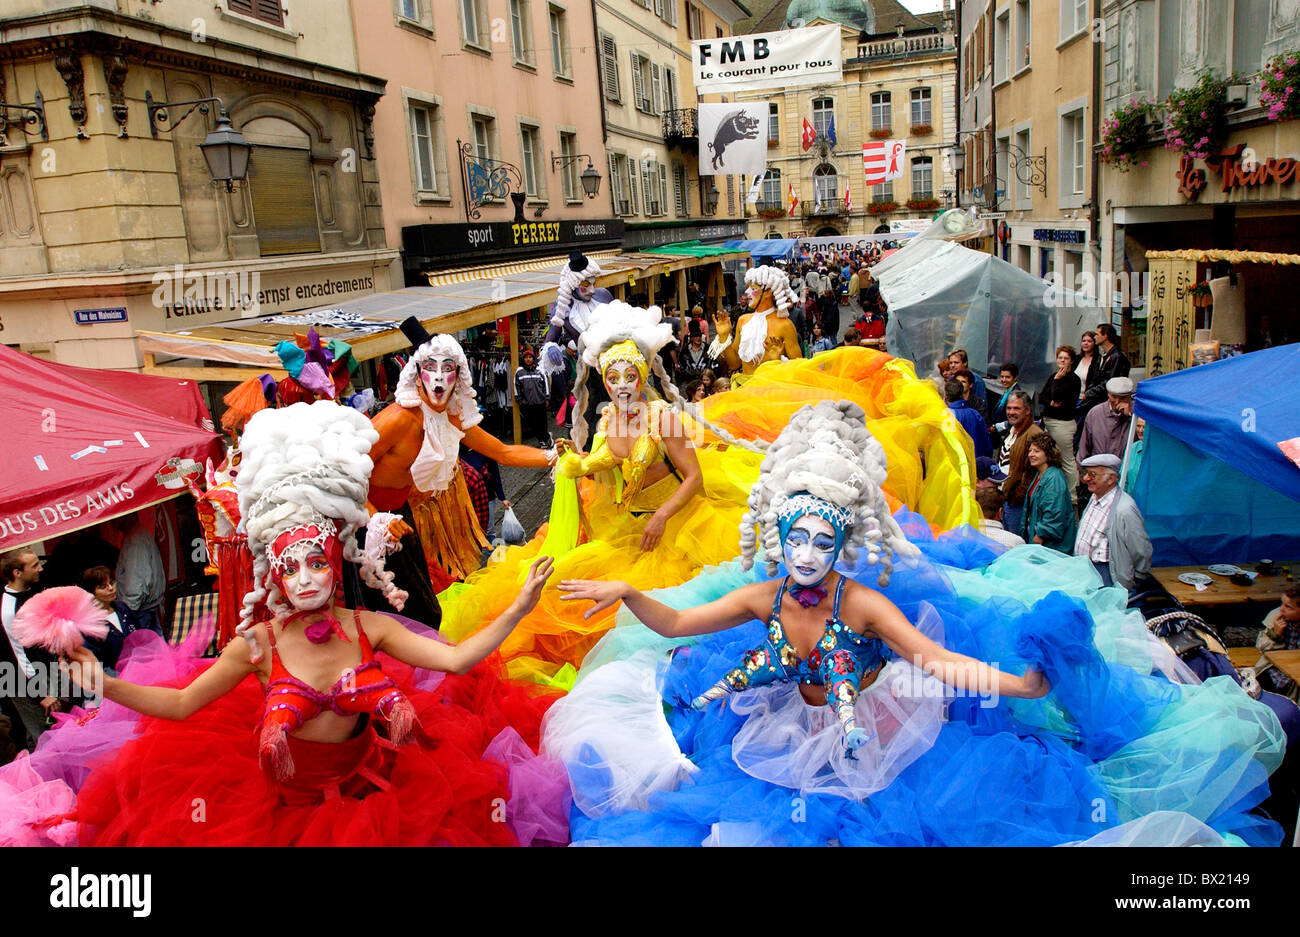 Braderie Canton Jura costumes dance dresses party different colors move no  model release party Porrentruy Stock Photo - Alamy